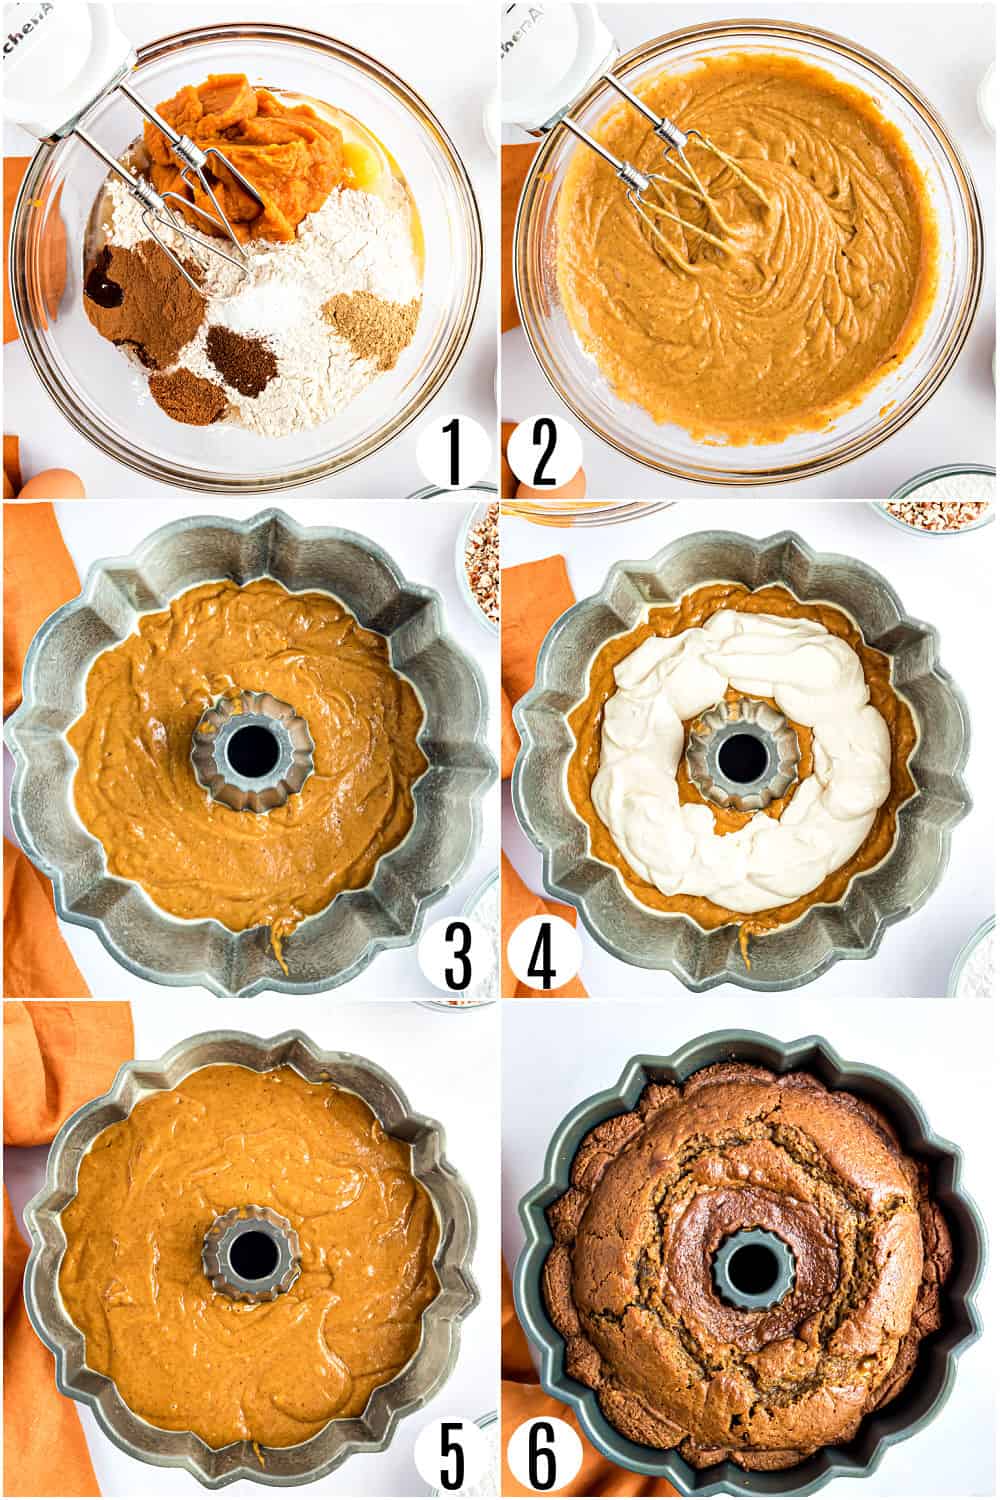 Step by step photos showing how to make pumpkin bundt cake.